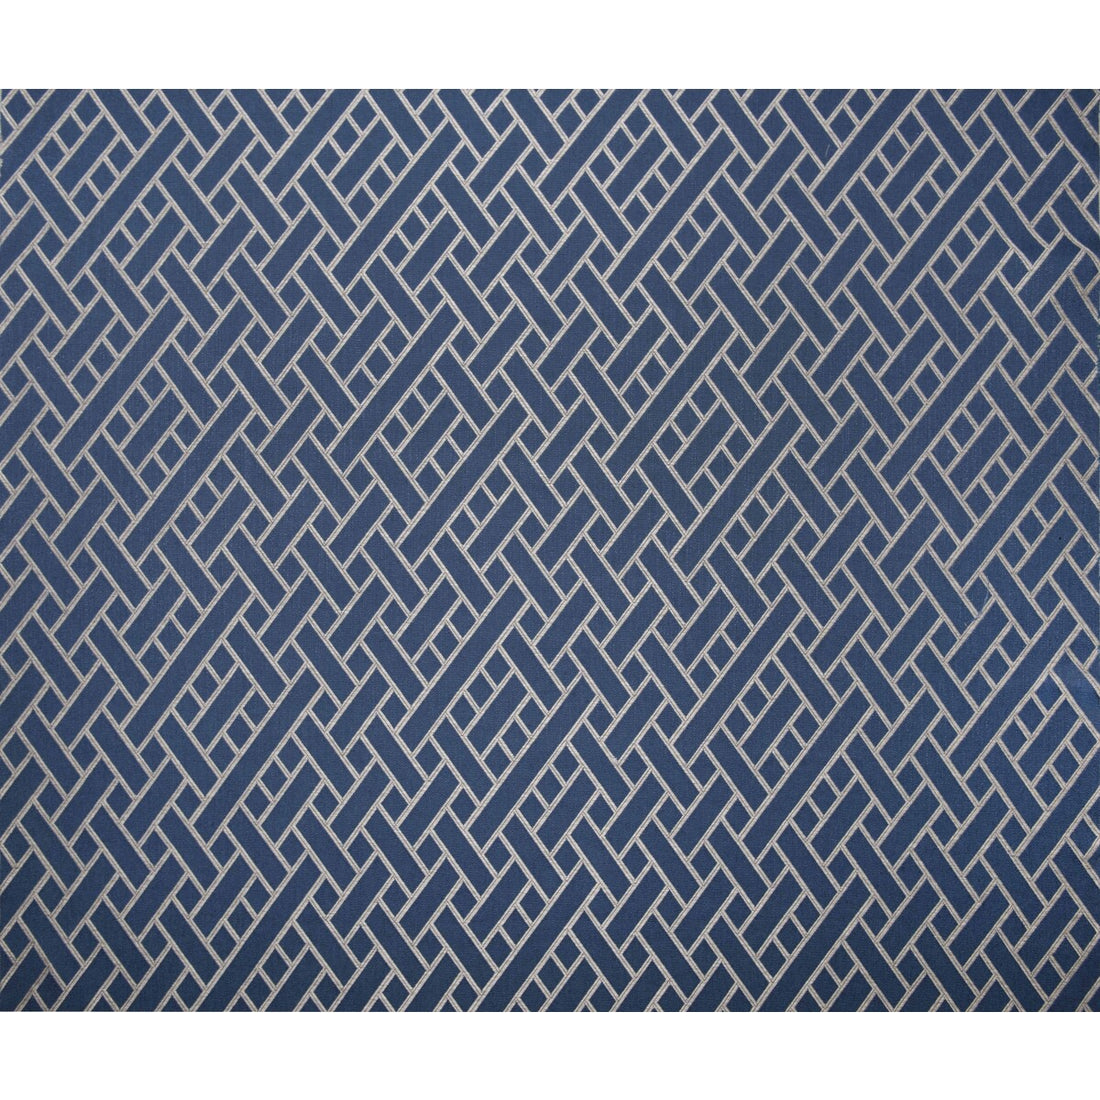 Nairobi fabric in azul oscuro color - pattern GDT5374.9.0 - by Gaston y Daniela in the Gaston Africalia collection